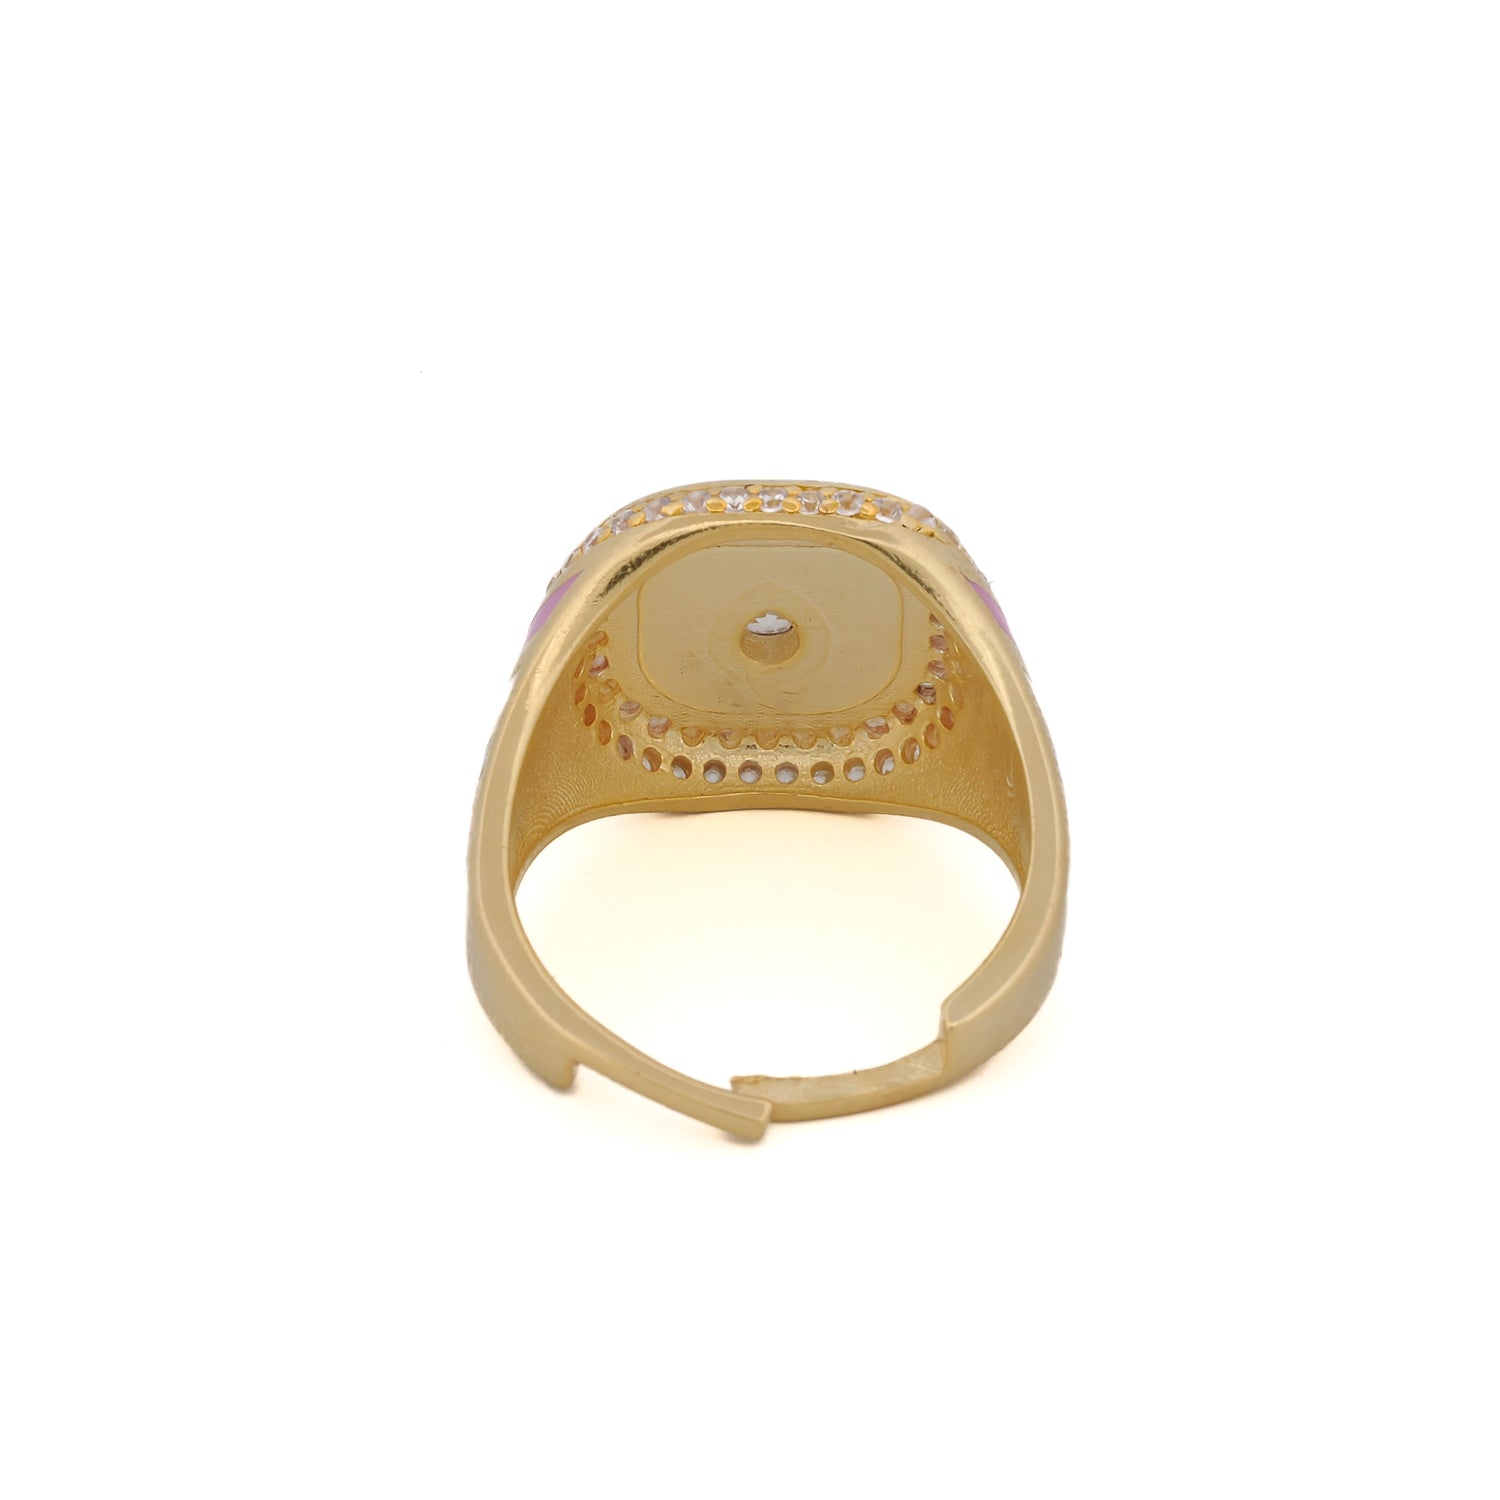 Handmade Elegance: USA Crafted Pastel Colors Gold Ring